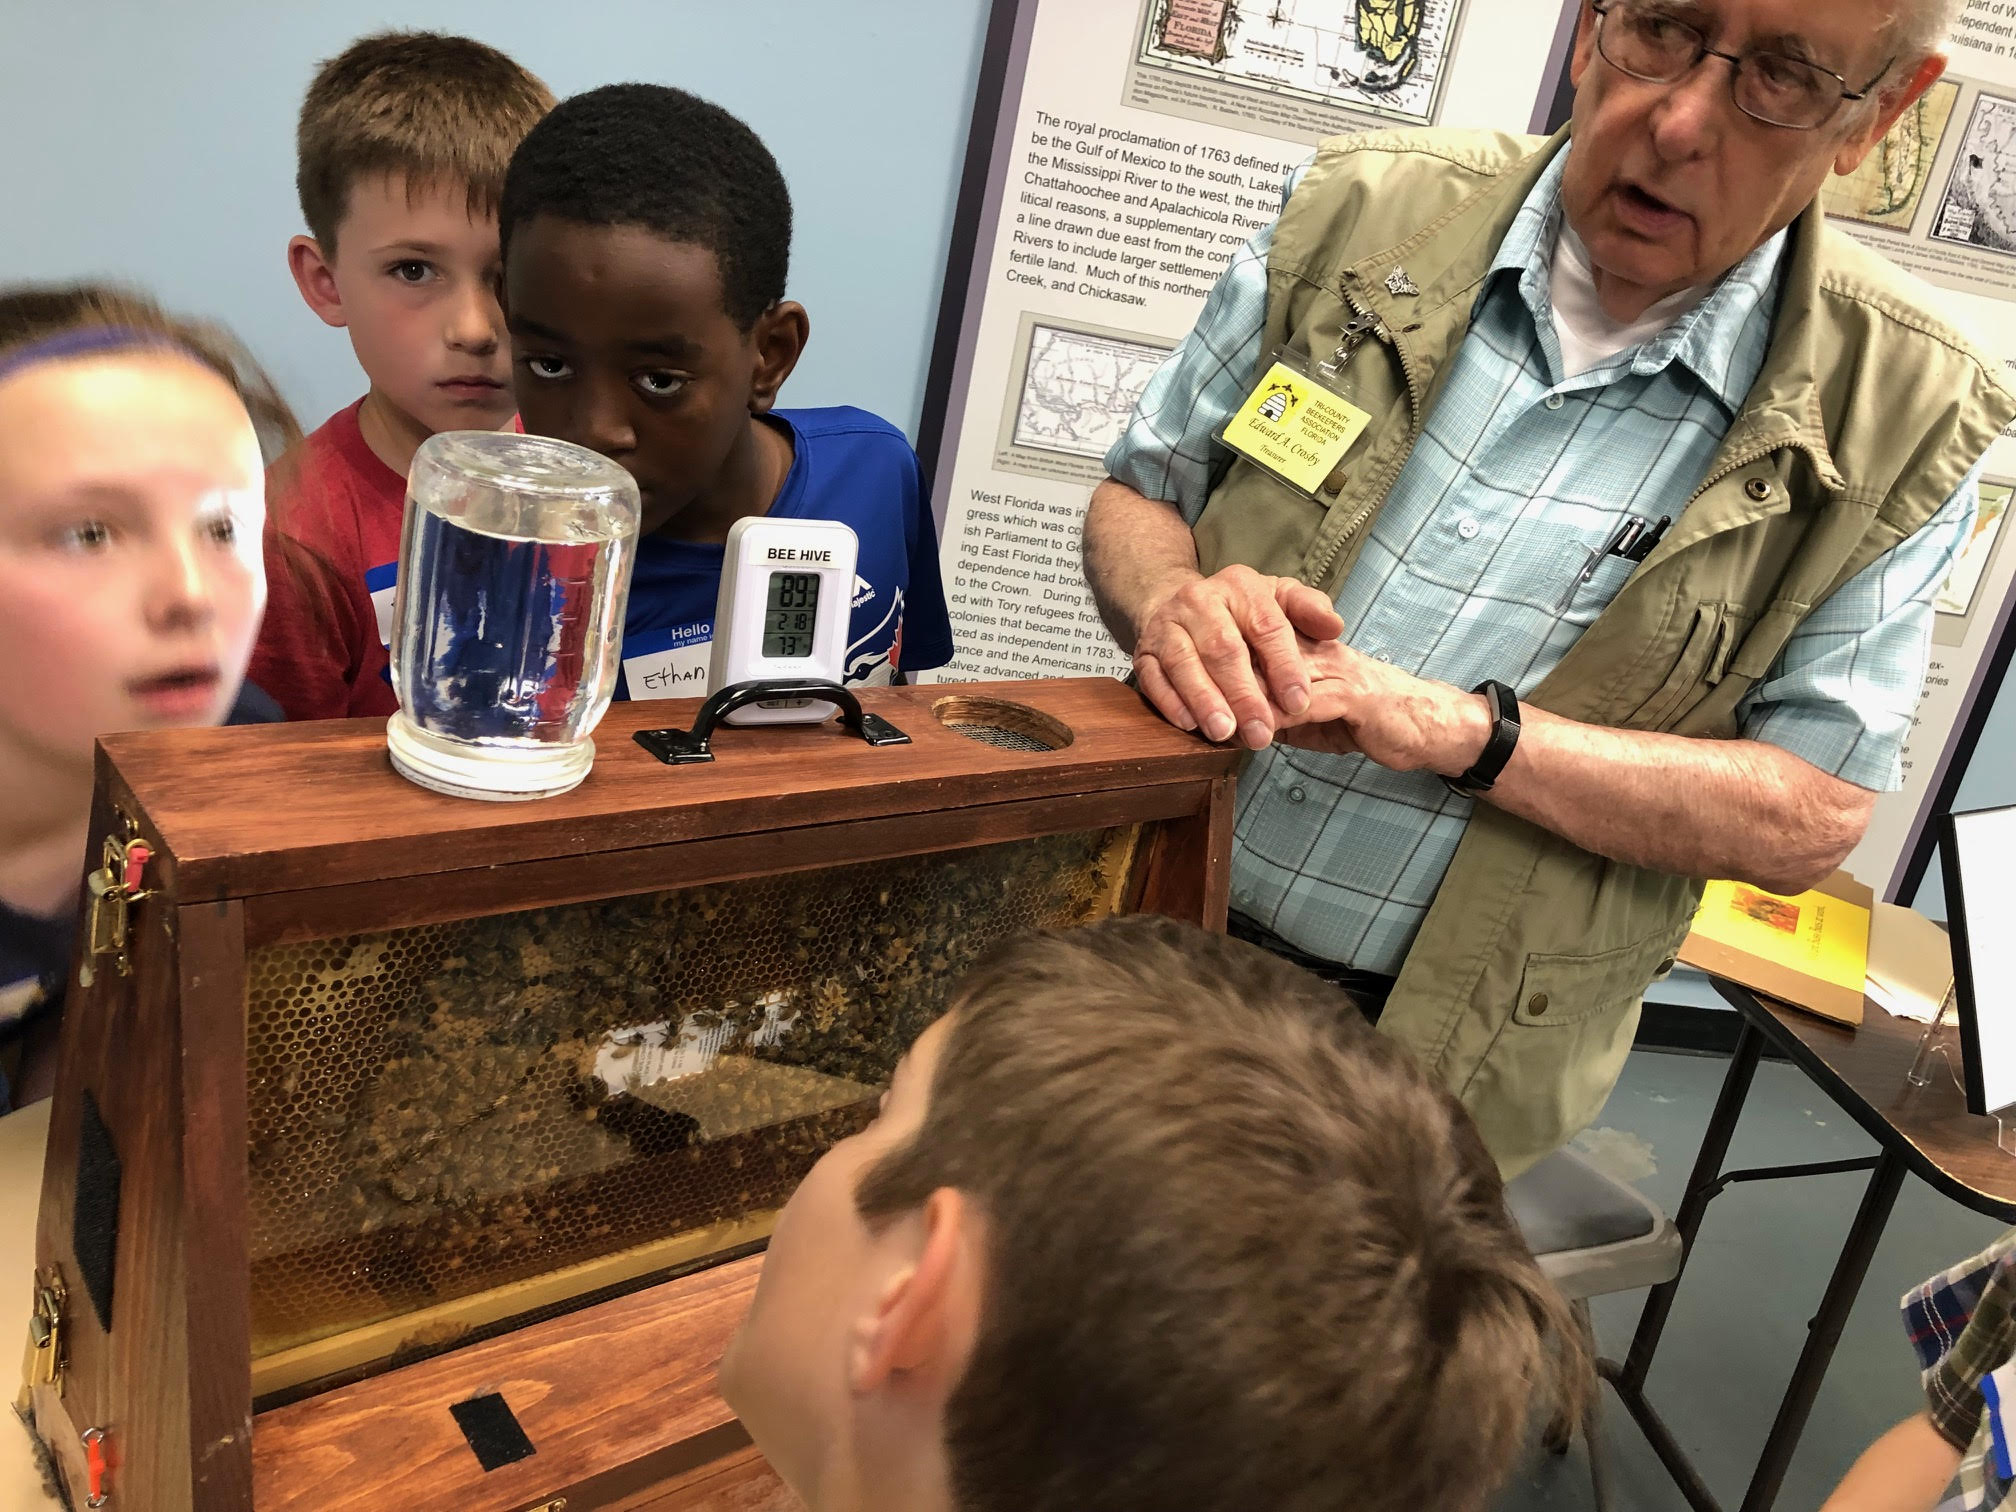 Learning about bees